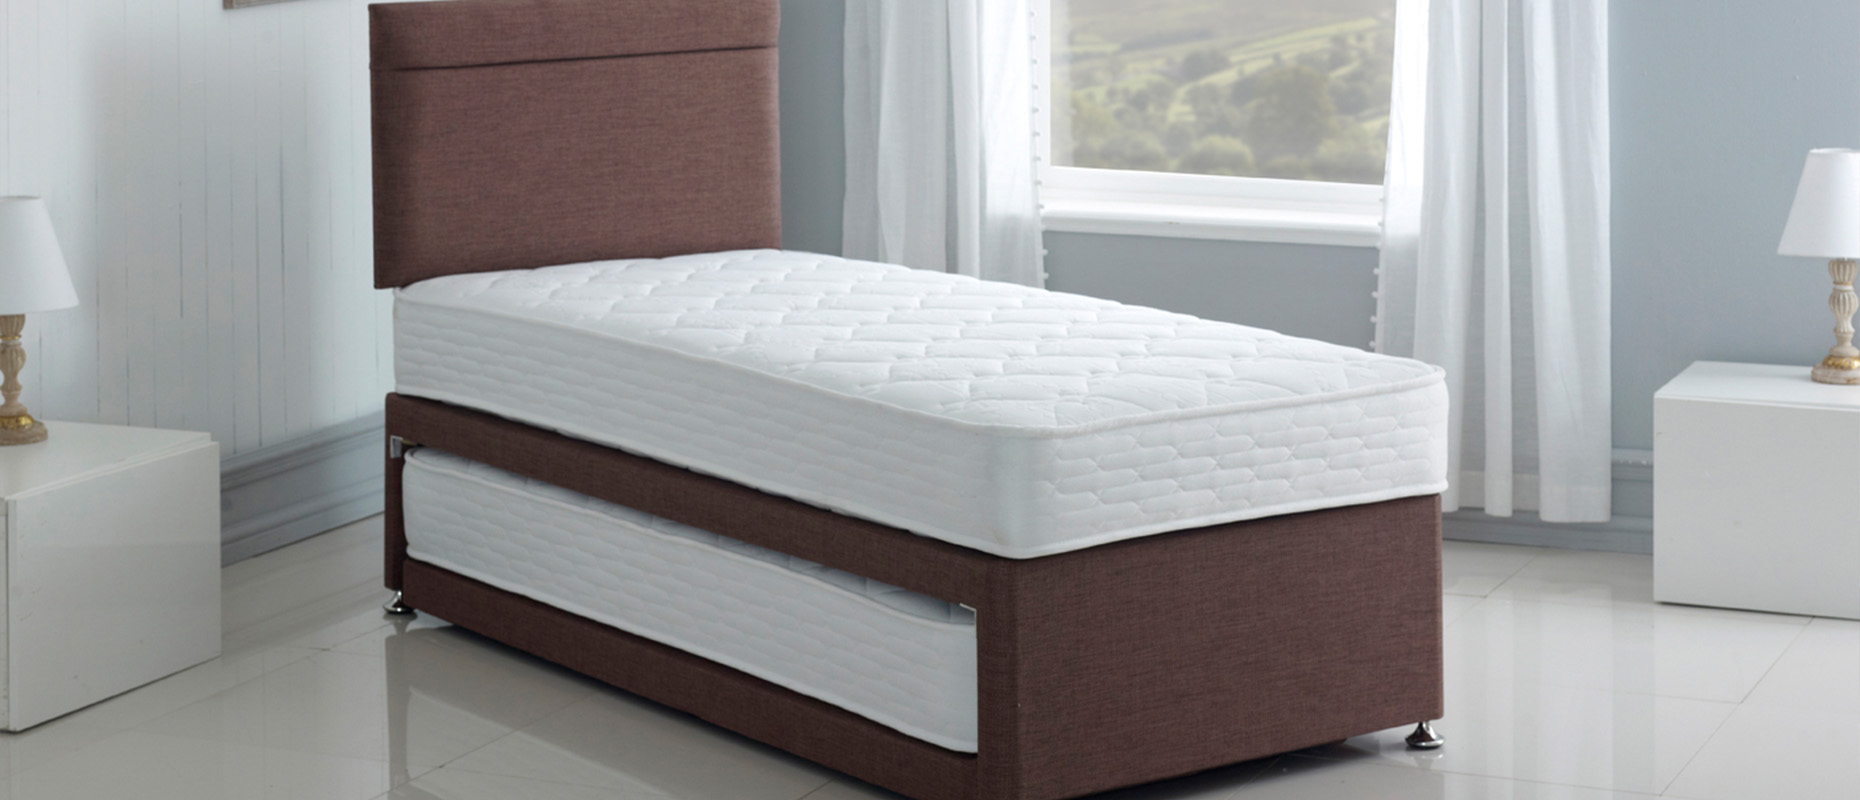 Single Beds and Mattresses at Forrest Furnishing